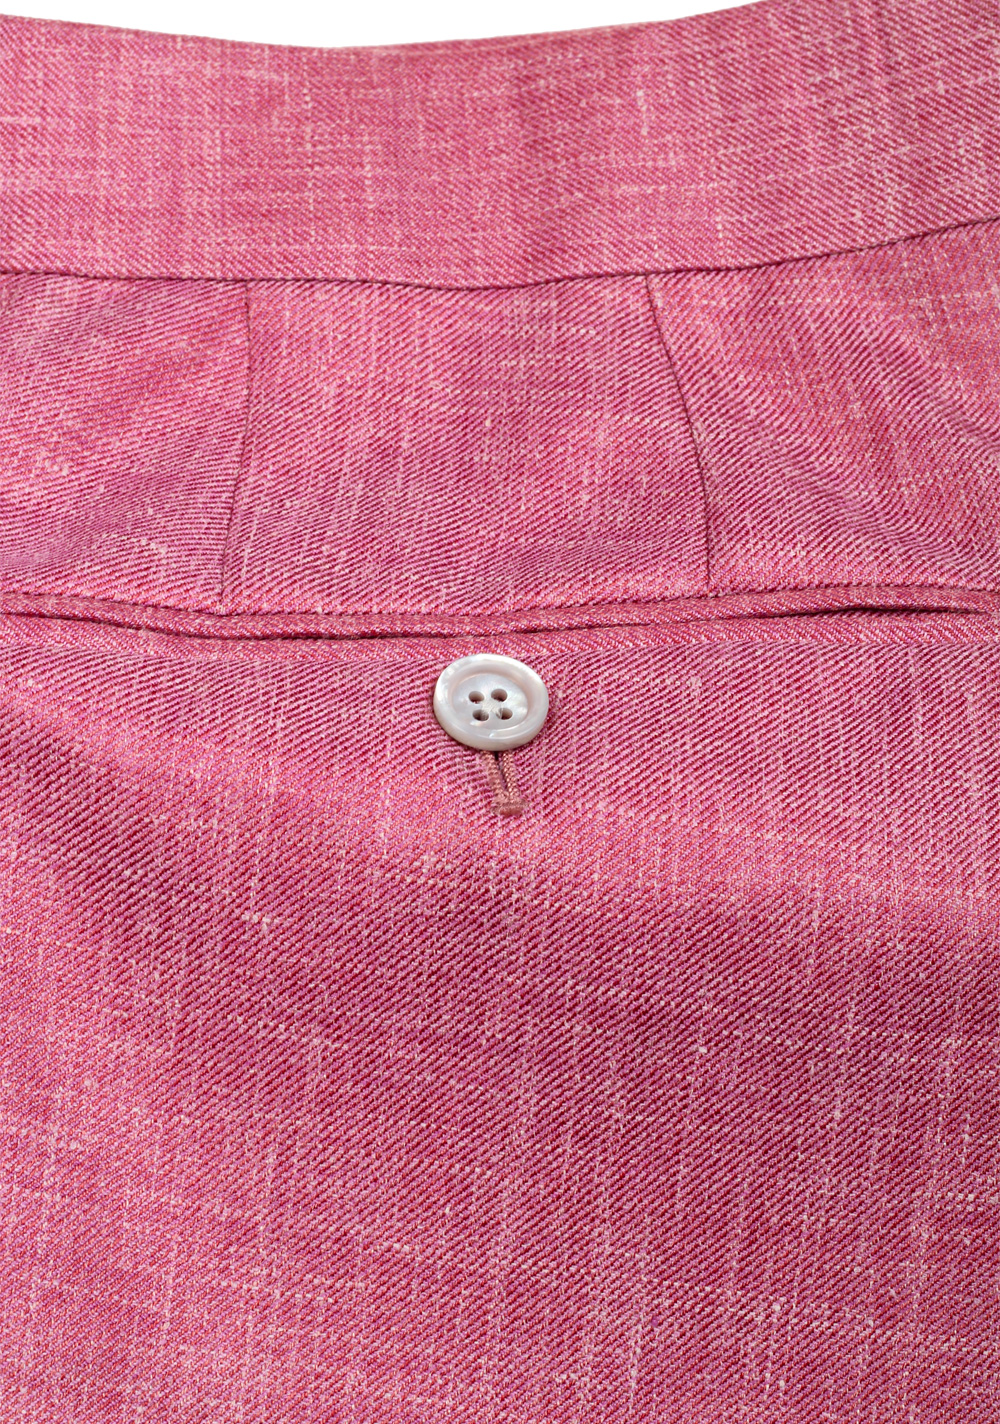 TOM FORD Pink Wool Blend Trousers Size 52 / 36 U.S. | Costume Limité